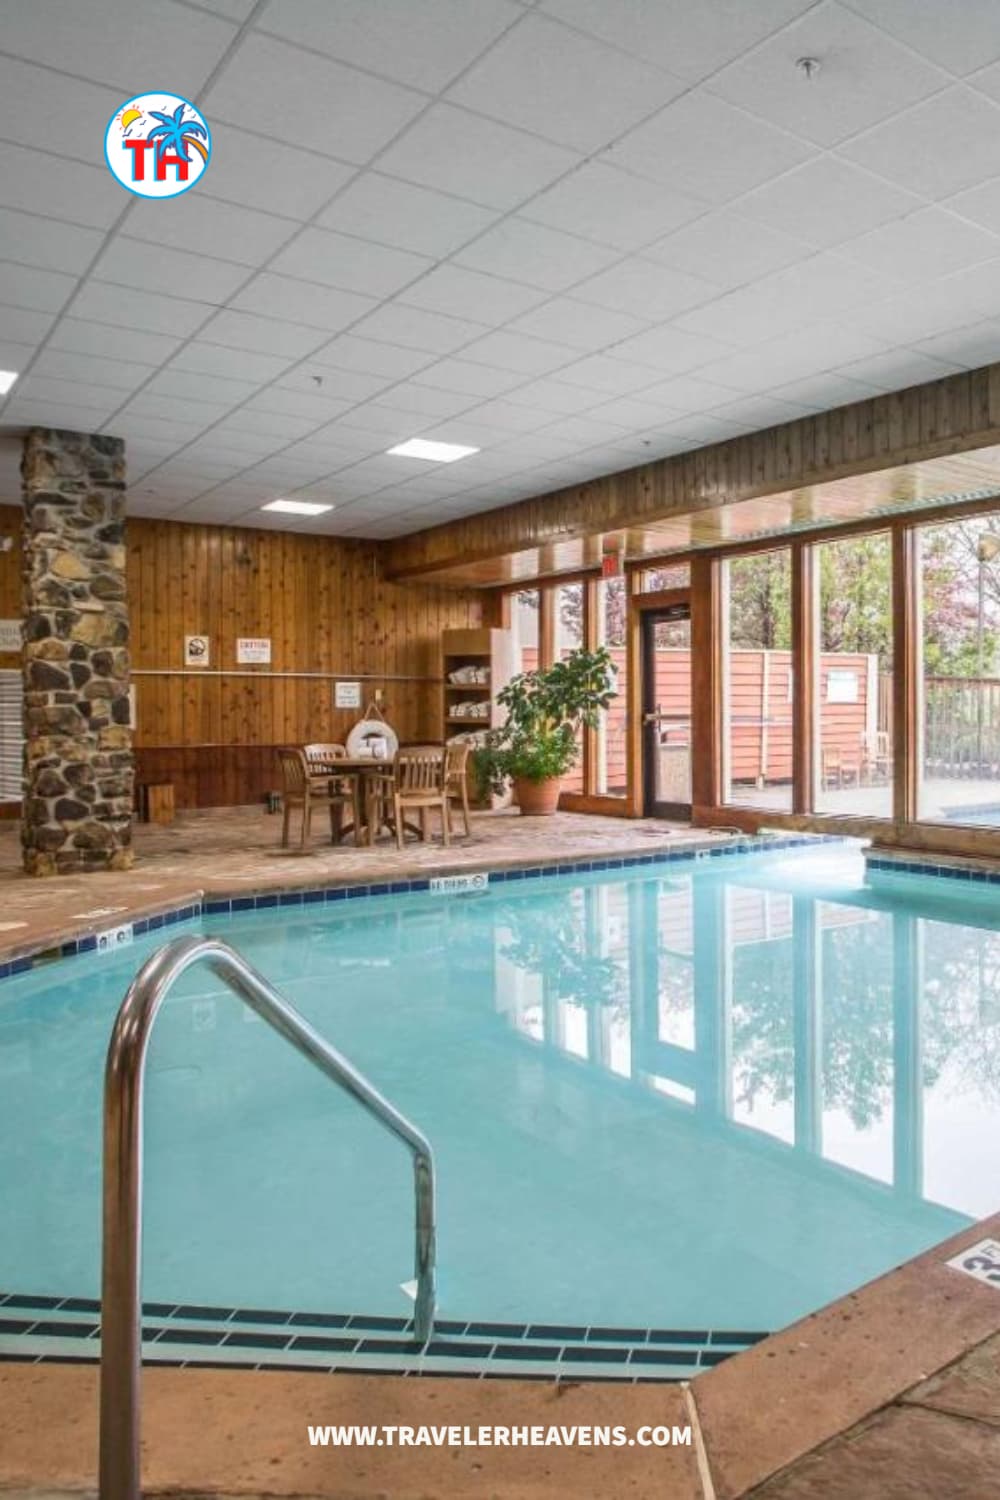 Beautiful Destinations, Hotels, Hotels in Merrillville Indiana with Indoor Pool, Indiana, Indiana Travel Guide, Travel to Merrillville, Visit Merrillville